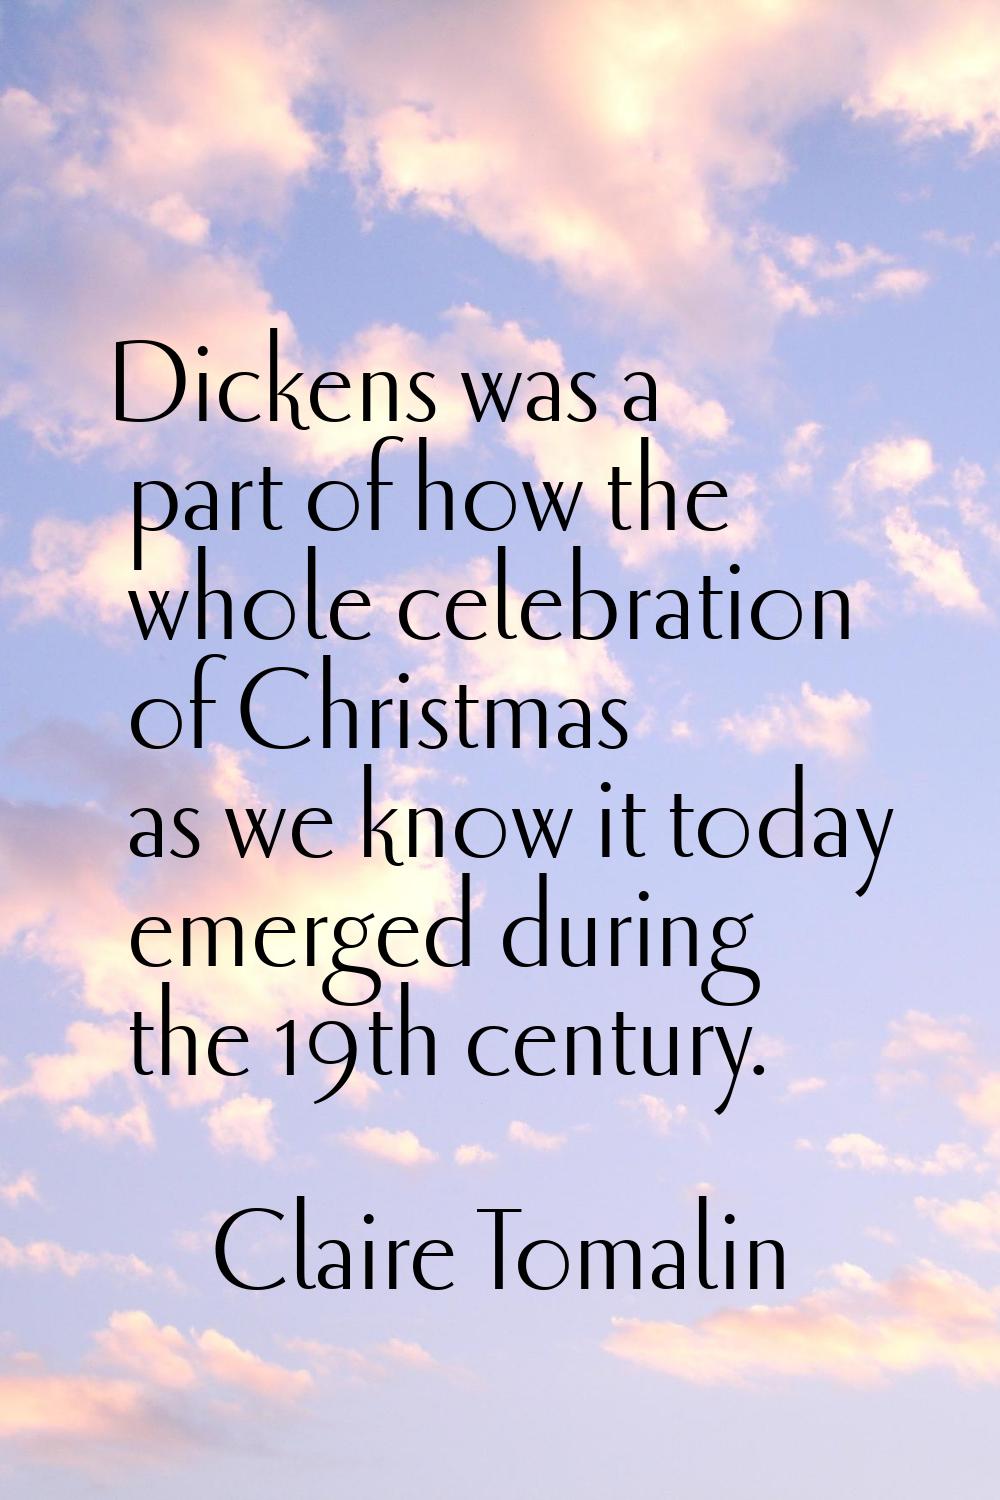 Dickens was a part of how the whole celebration of Christmas as we know it today emerged during the